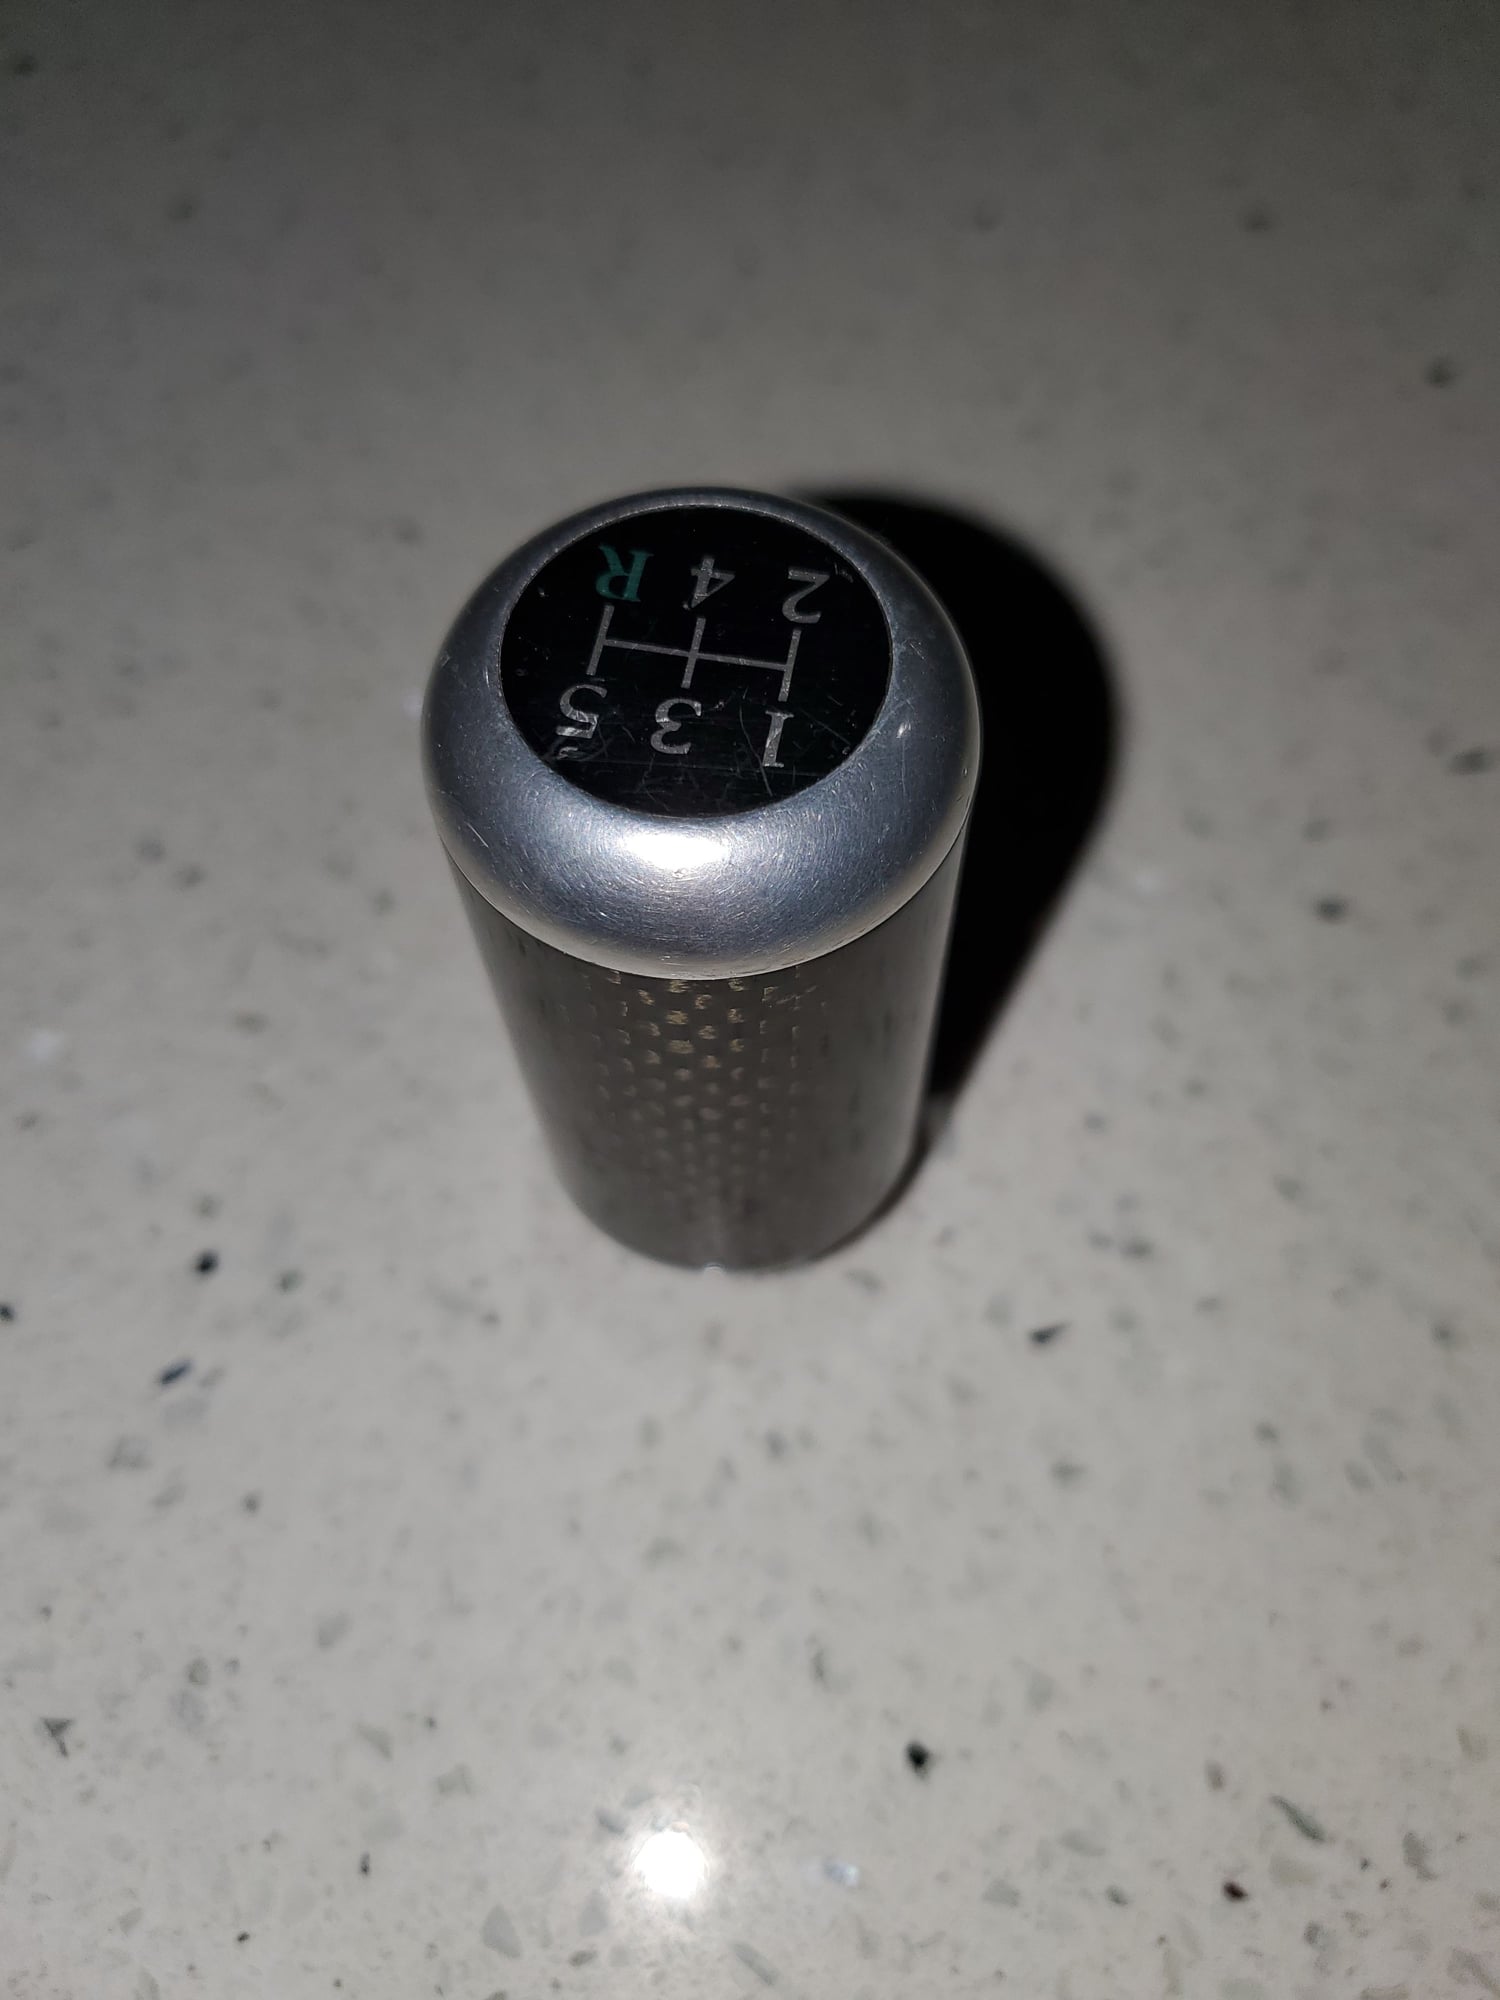 Interior/Upholstery - FS: slim mazdaspeed real carbon shift knob - Used - 0  All Models - Balbeck, TX 86753, United States